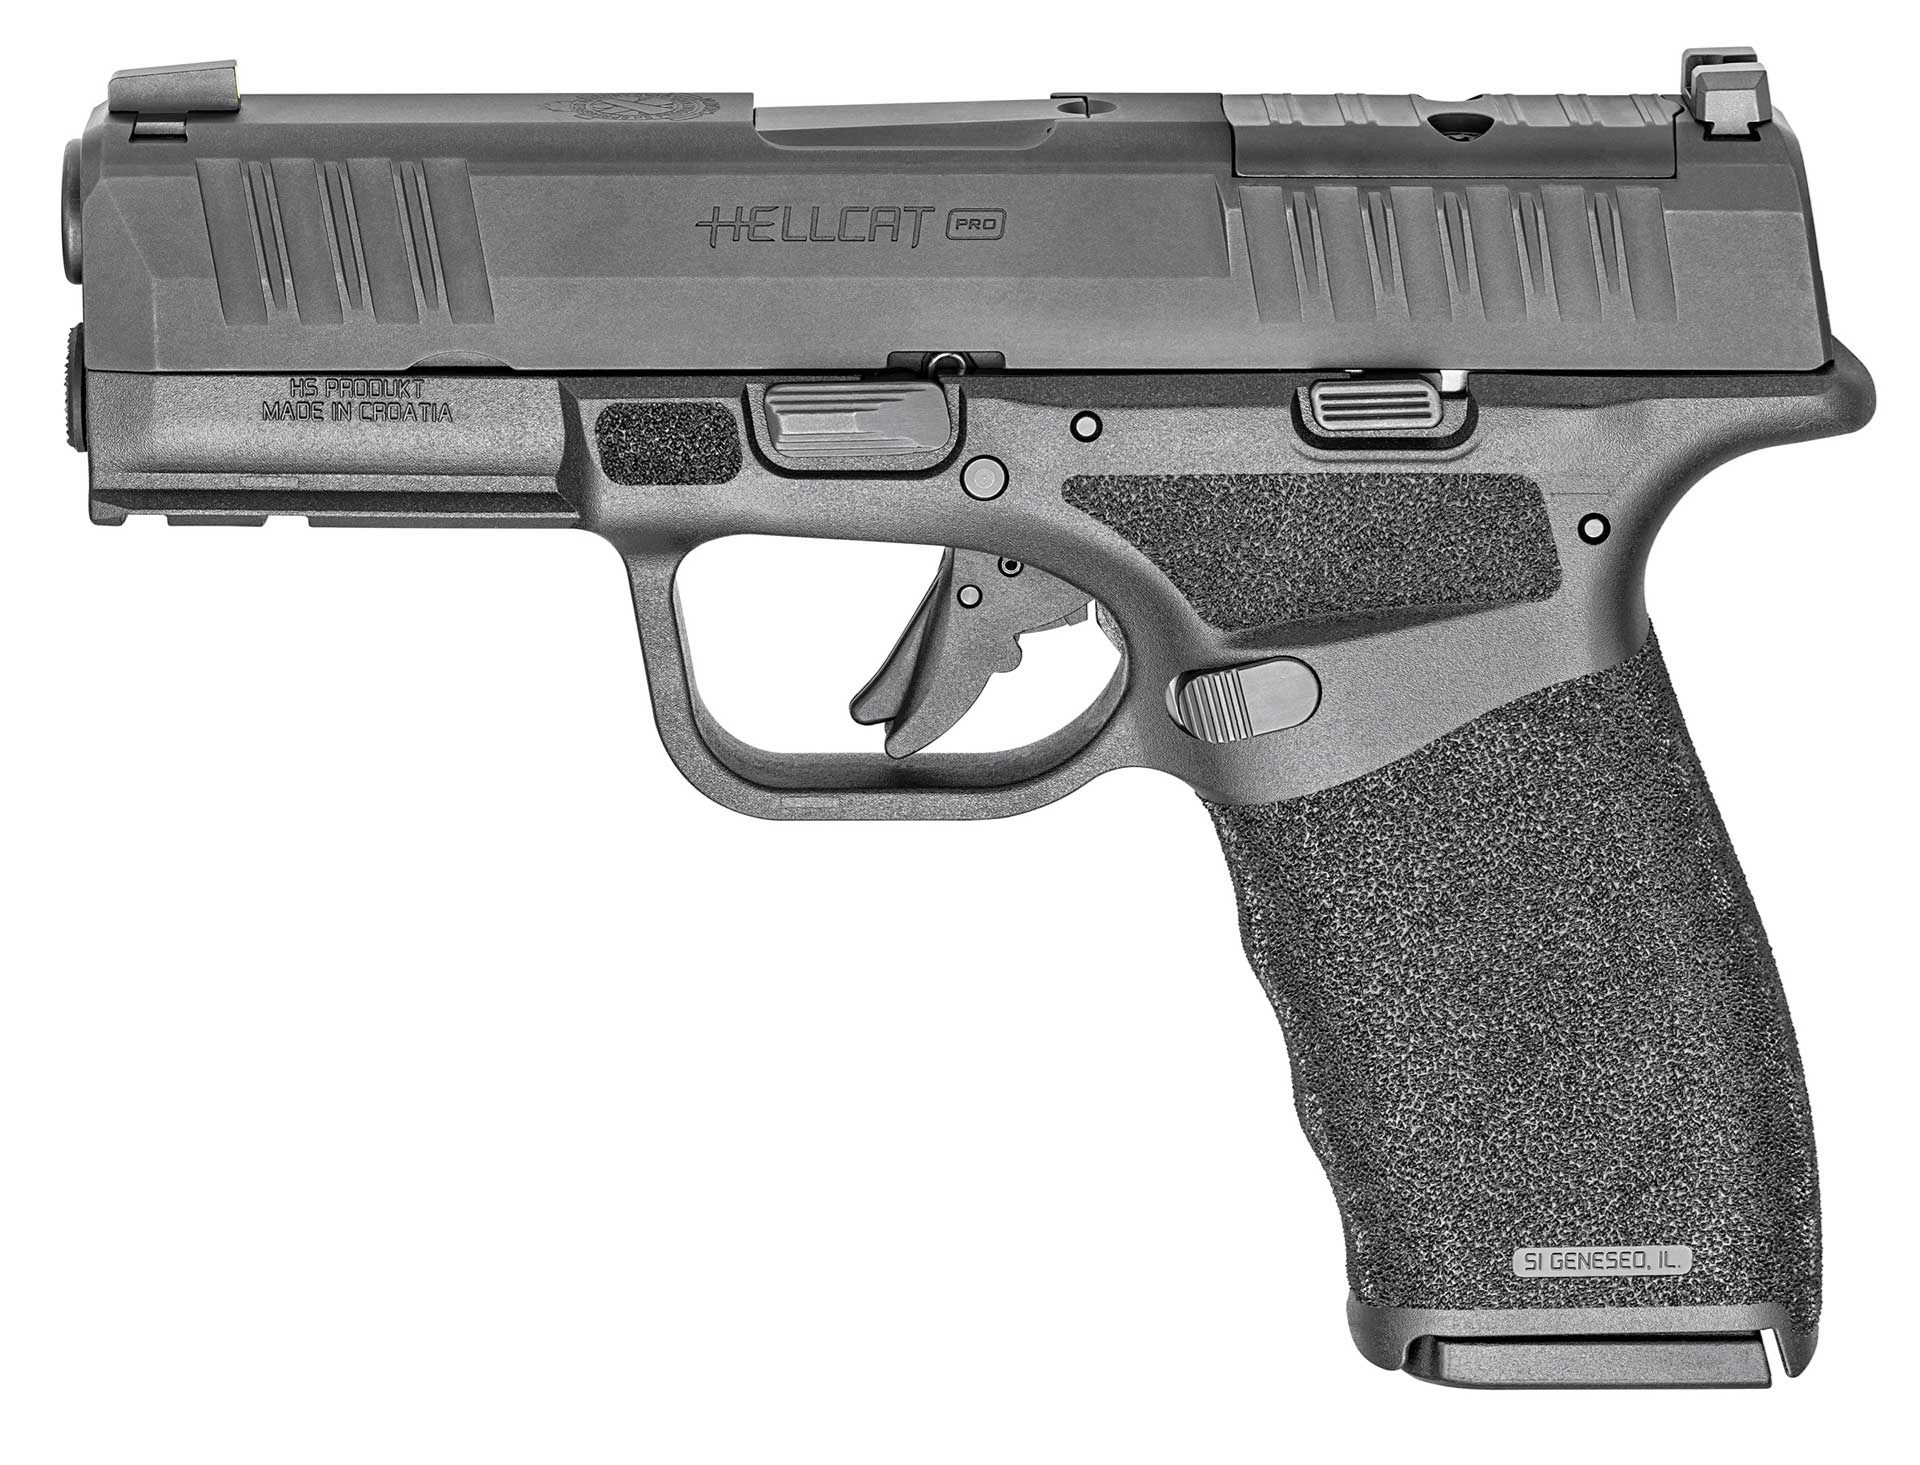 Springfield Armory Hellcat Pro shown, left side, on white.